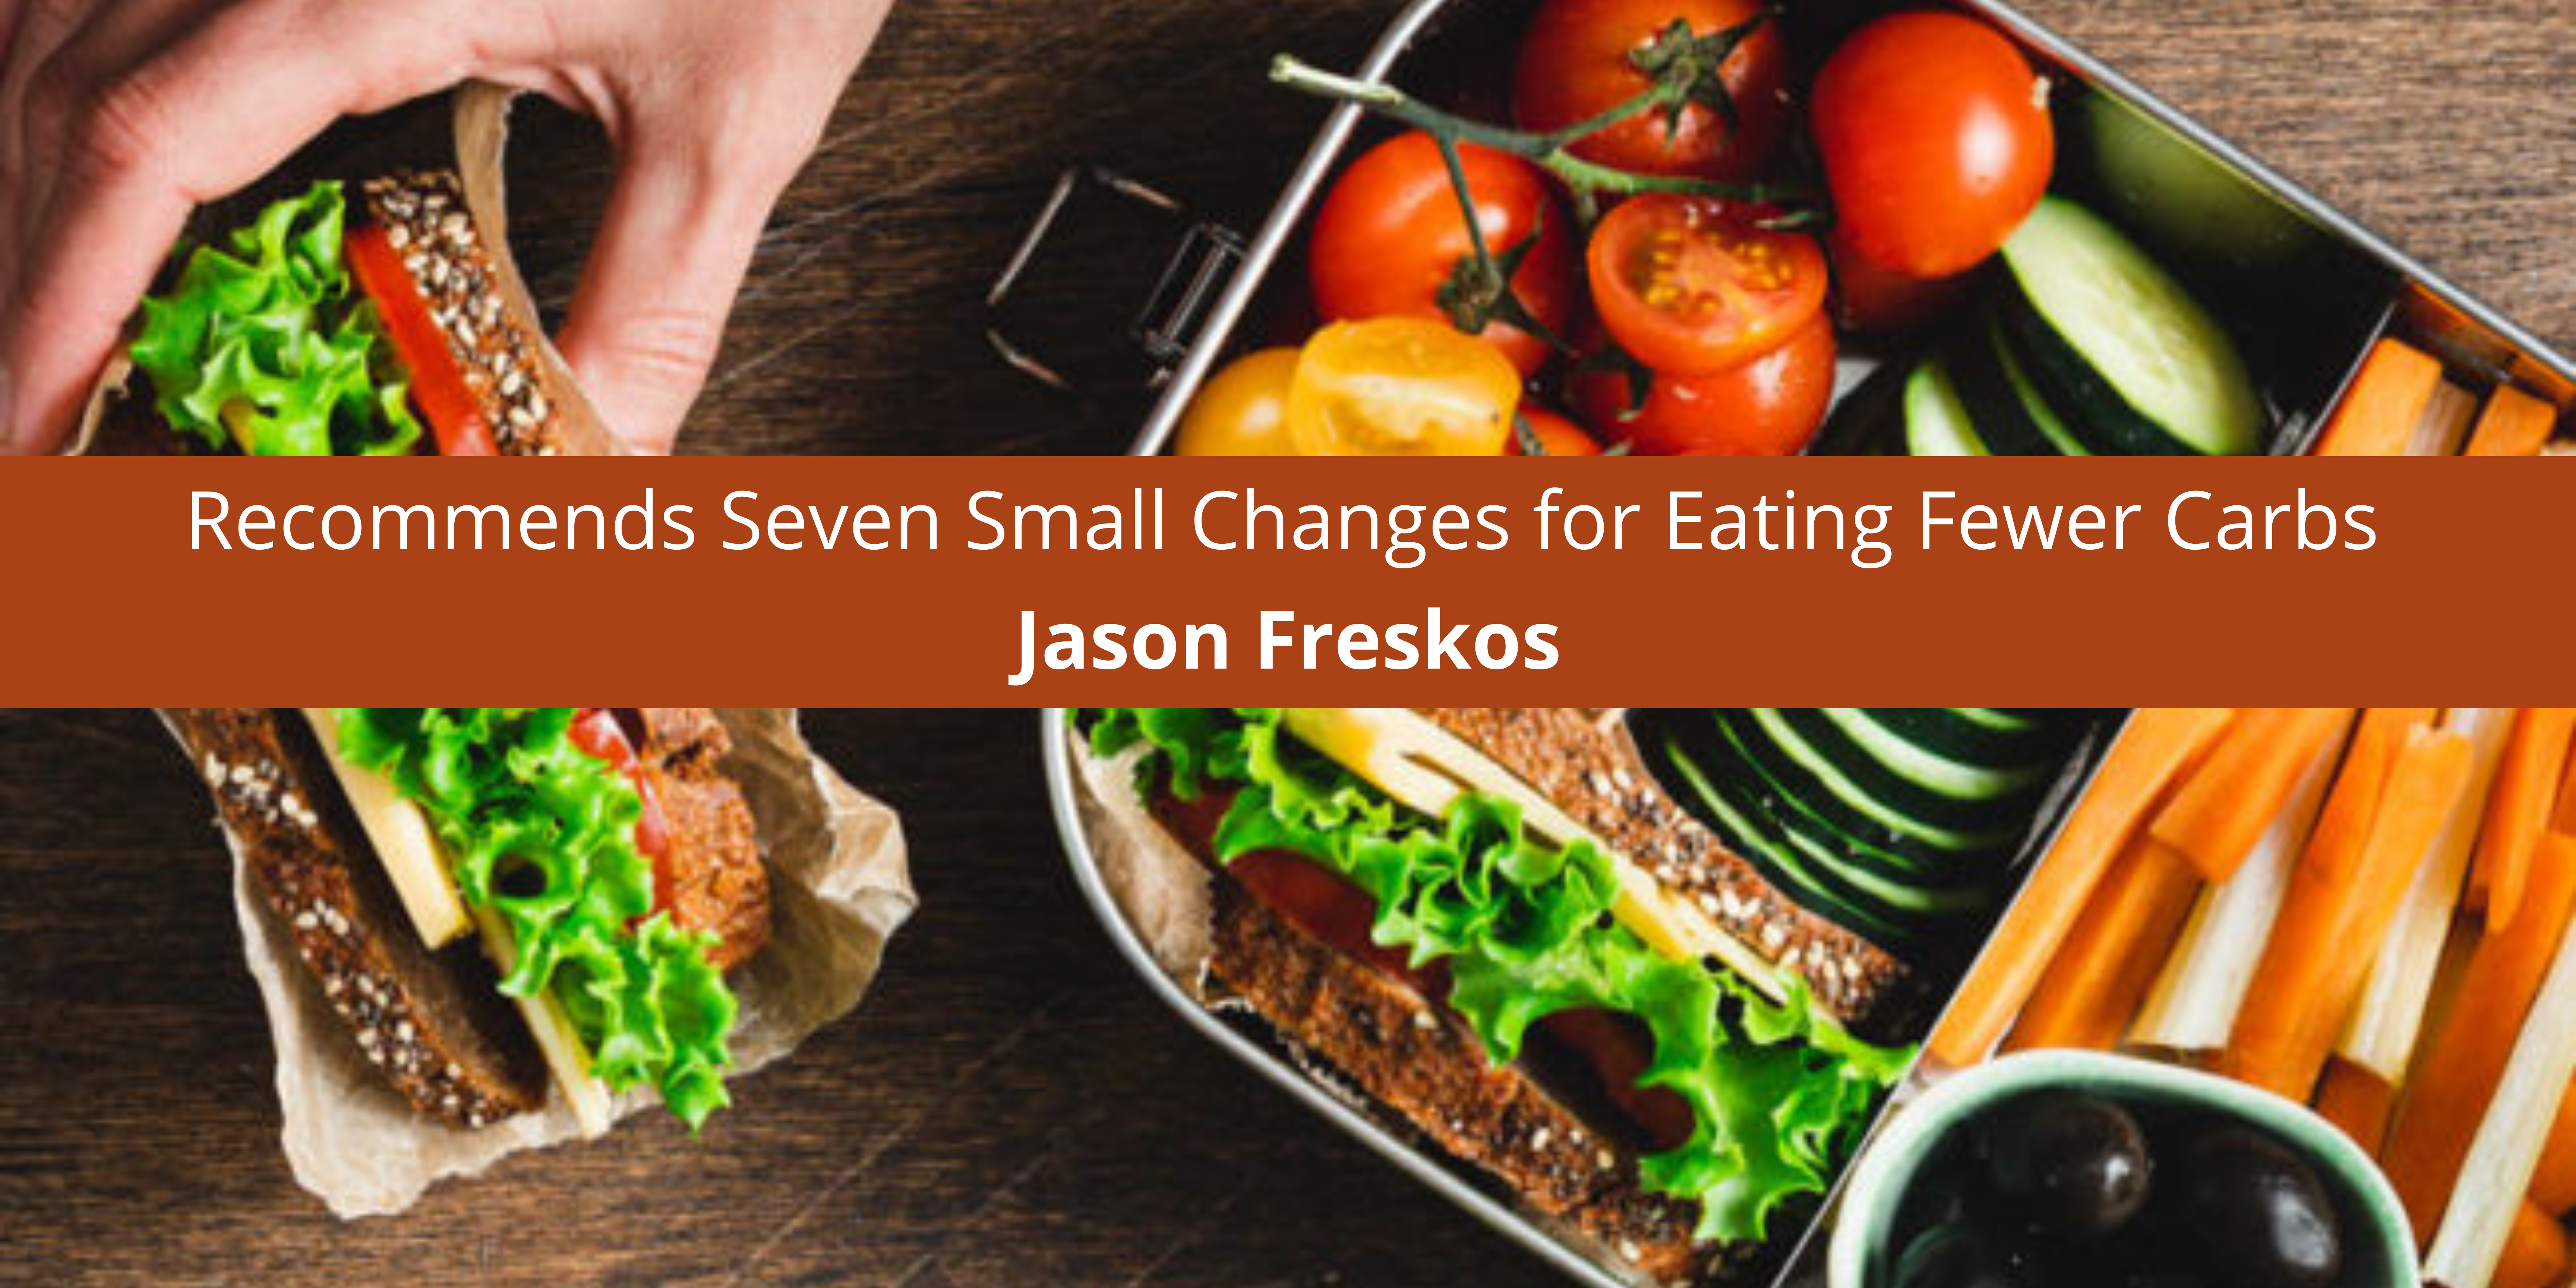 Jason Freskos Recommends Seven Small Changes for Eating Fewer Carbs